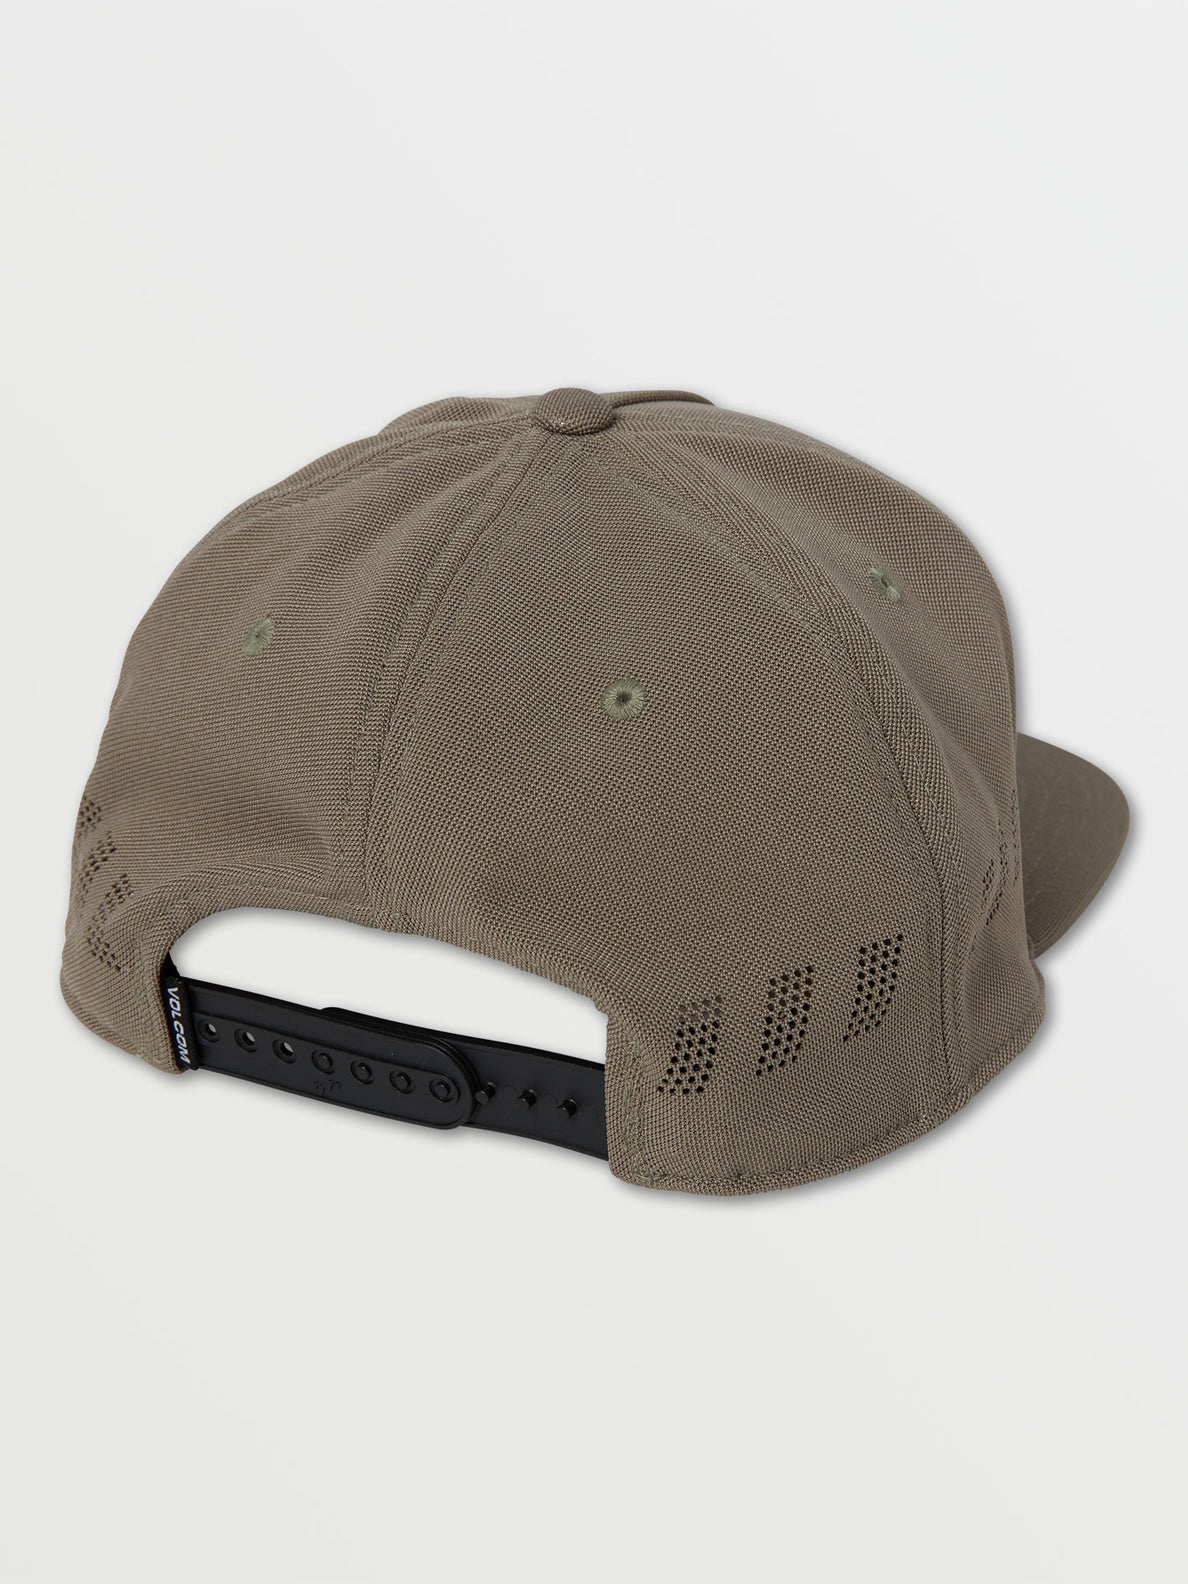 Whitmore 110 Snapback Hat - Army Green Combo (D5542100_ARC) [B]